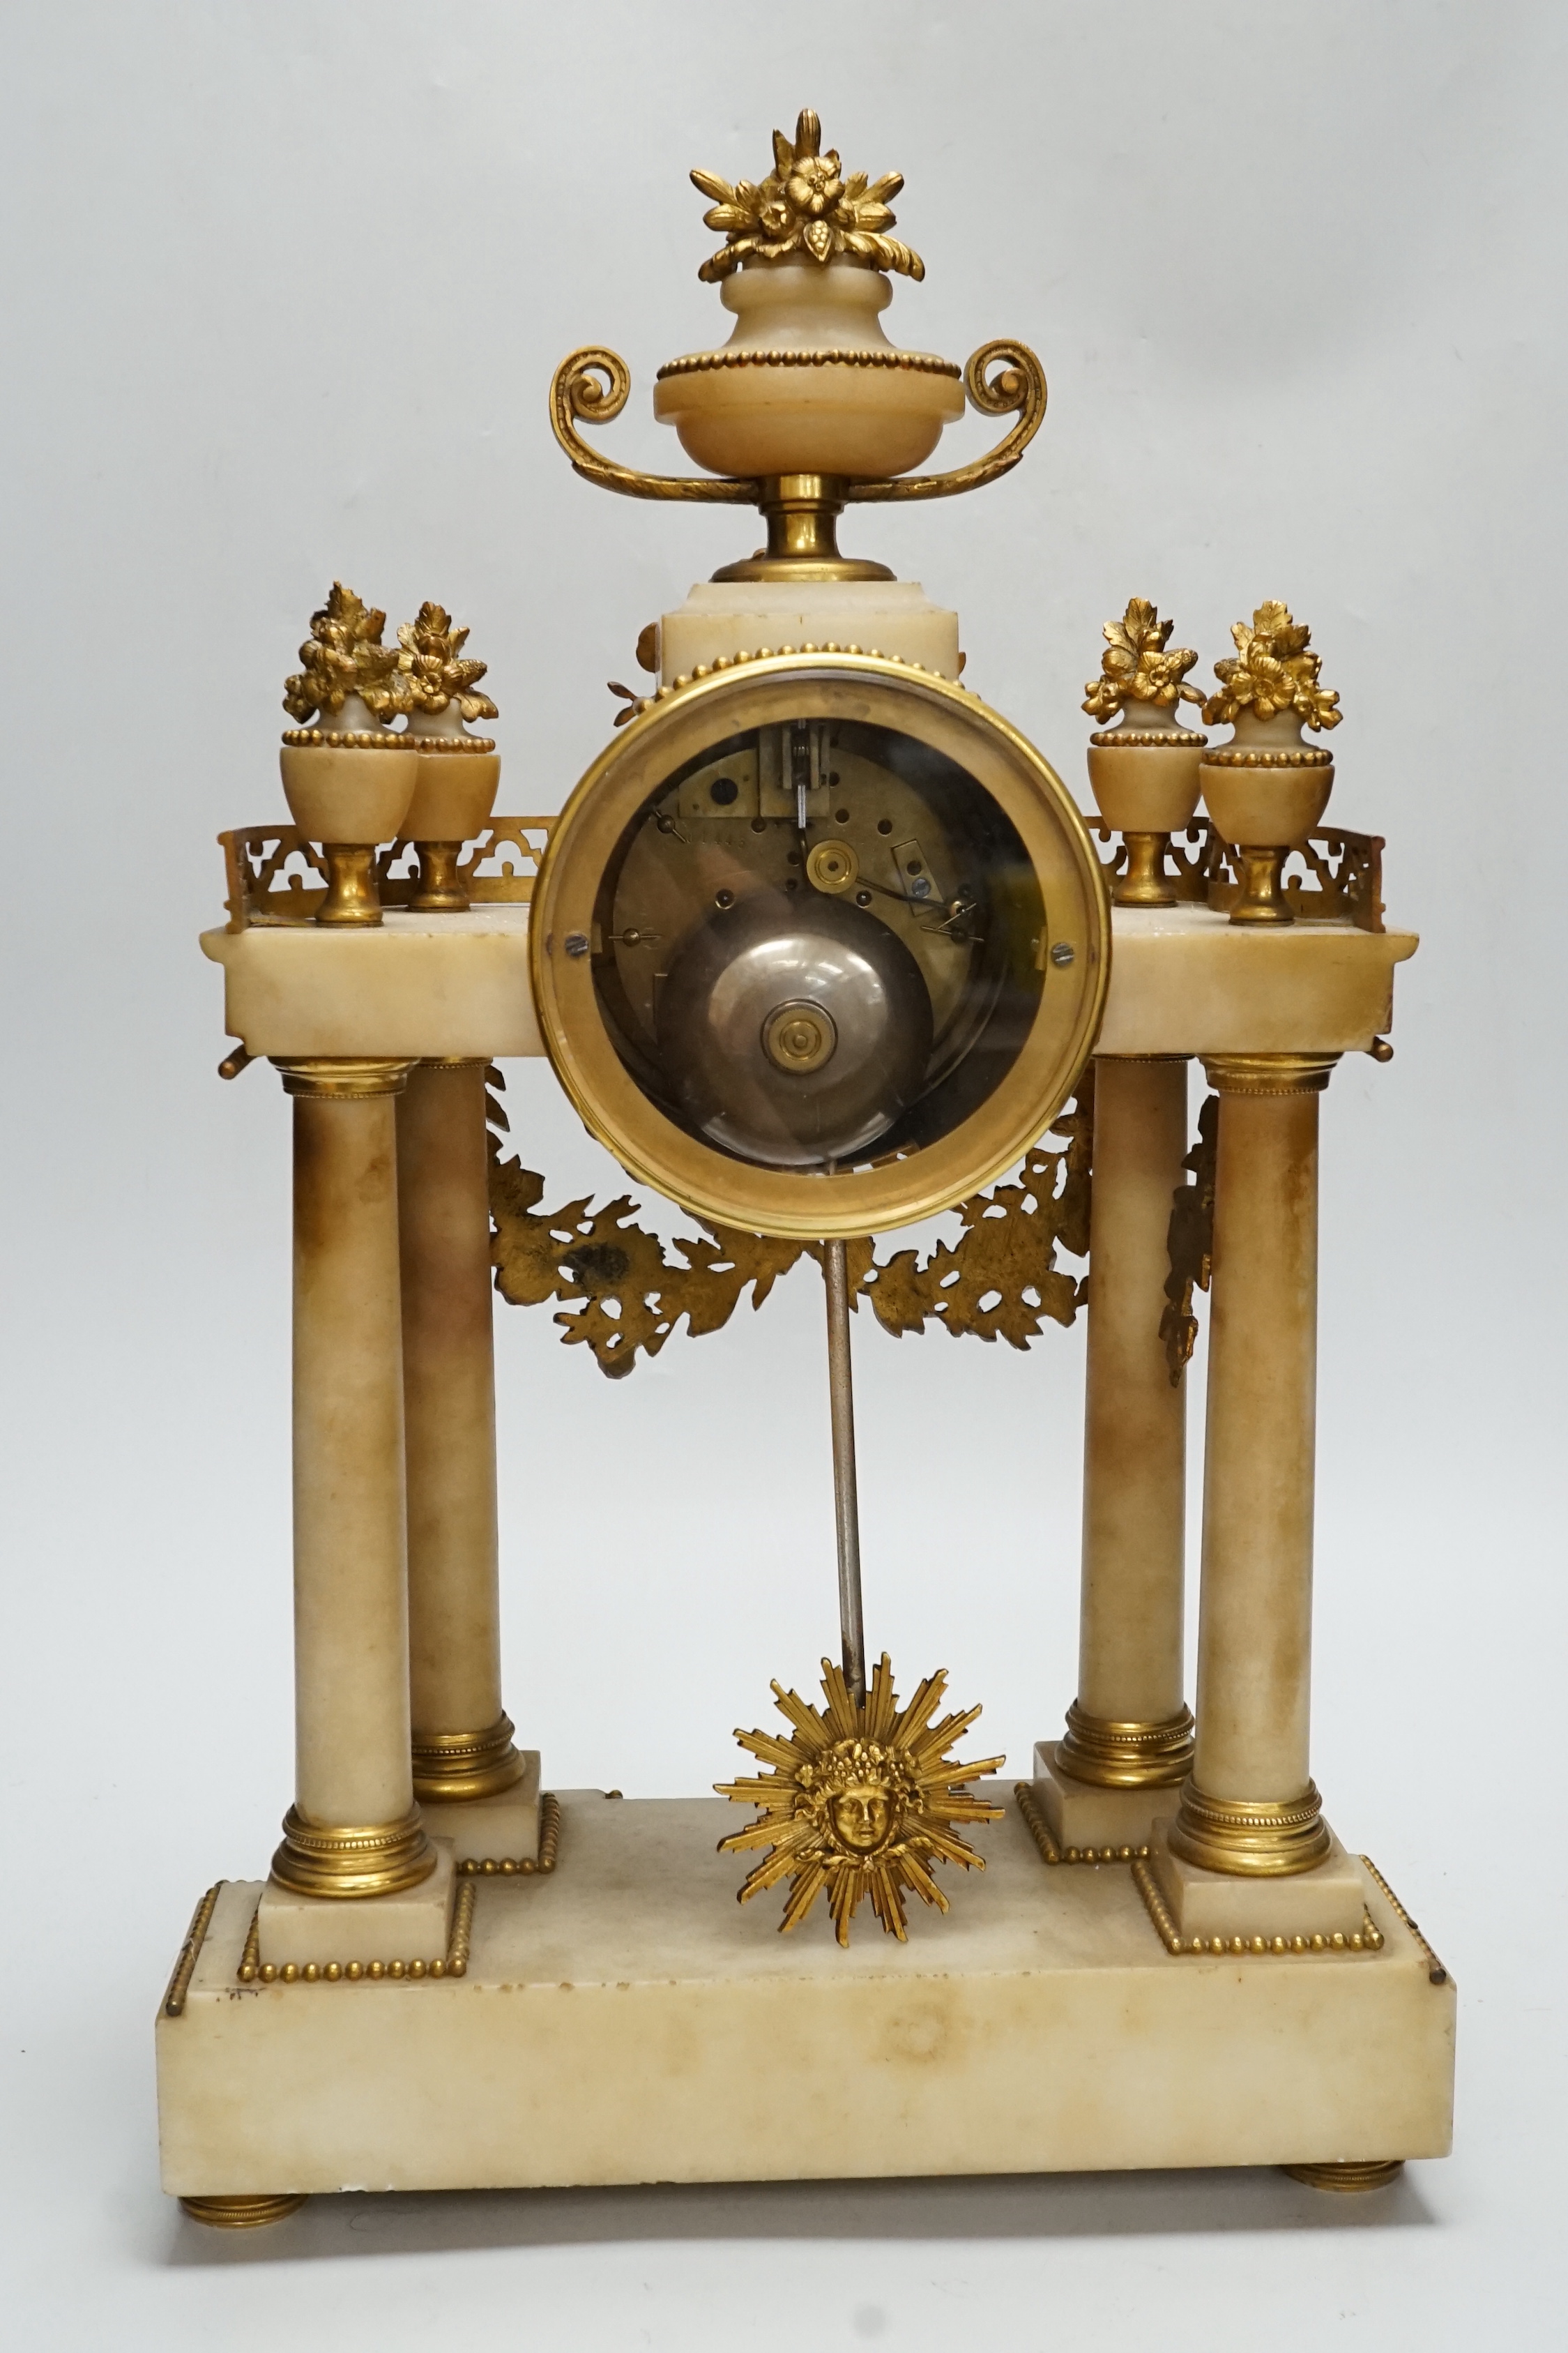 A late 19th century French alabaster and ormolu mounted mantel clock by Le Roy & Fils, key and - Image 4 of 6